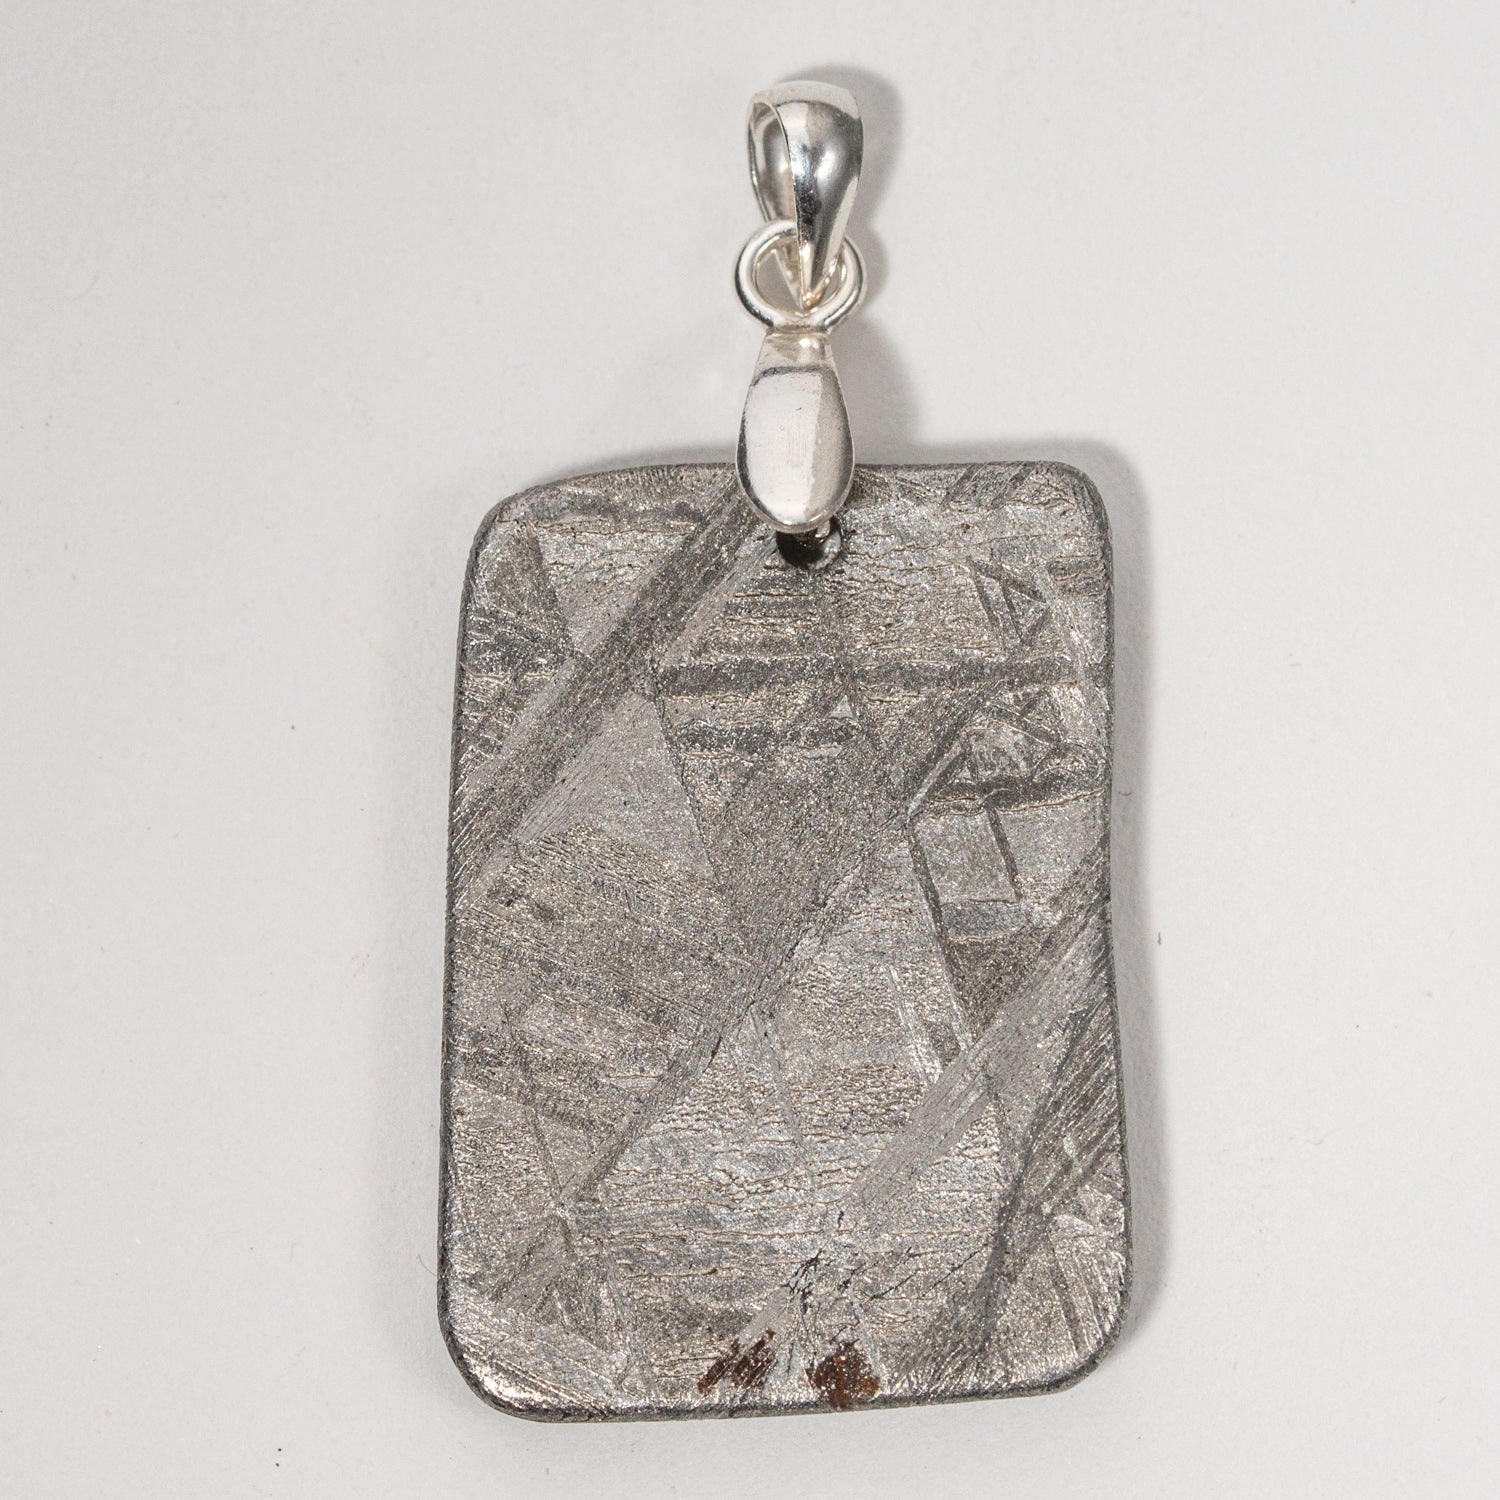 Polished Seymchan Meteorite pendant (8.2 grams) with 18" Sterling Silver Chain